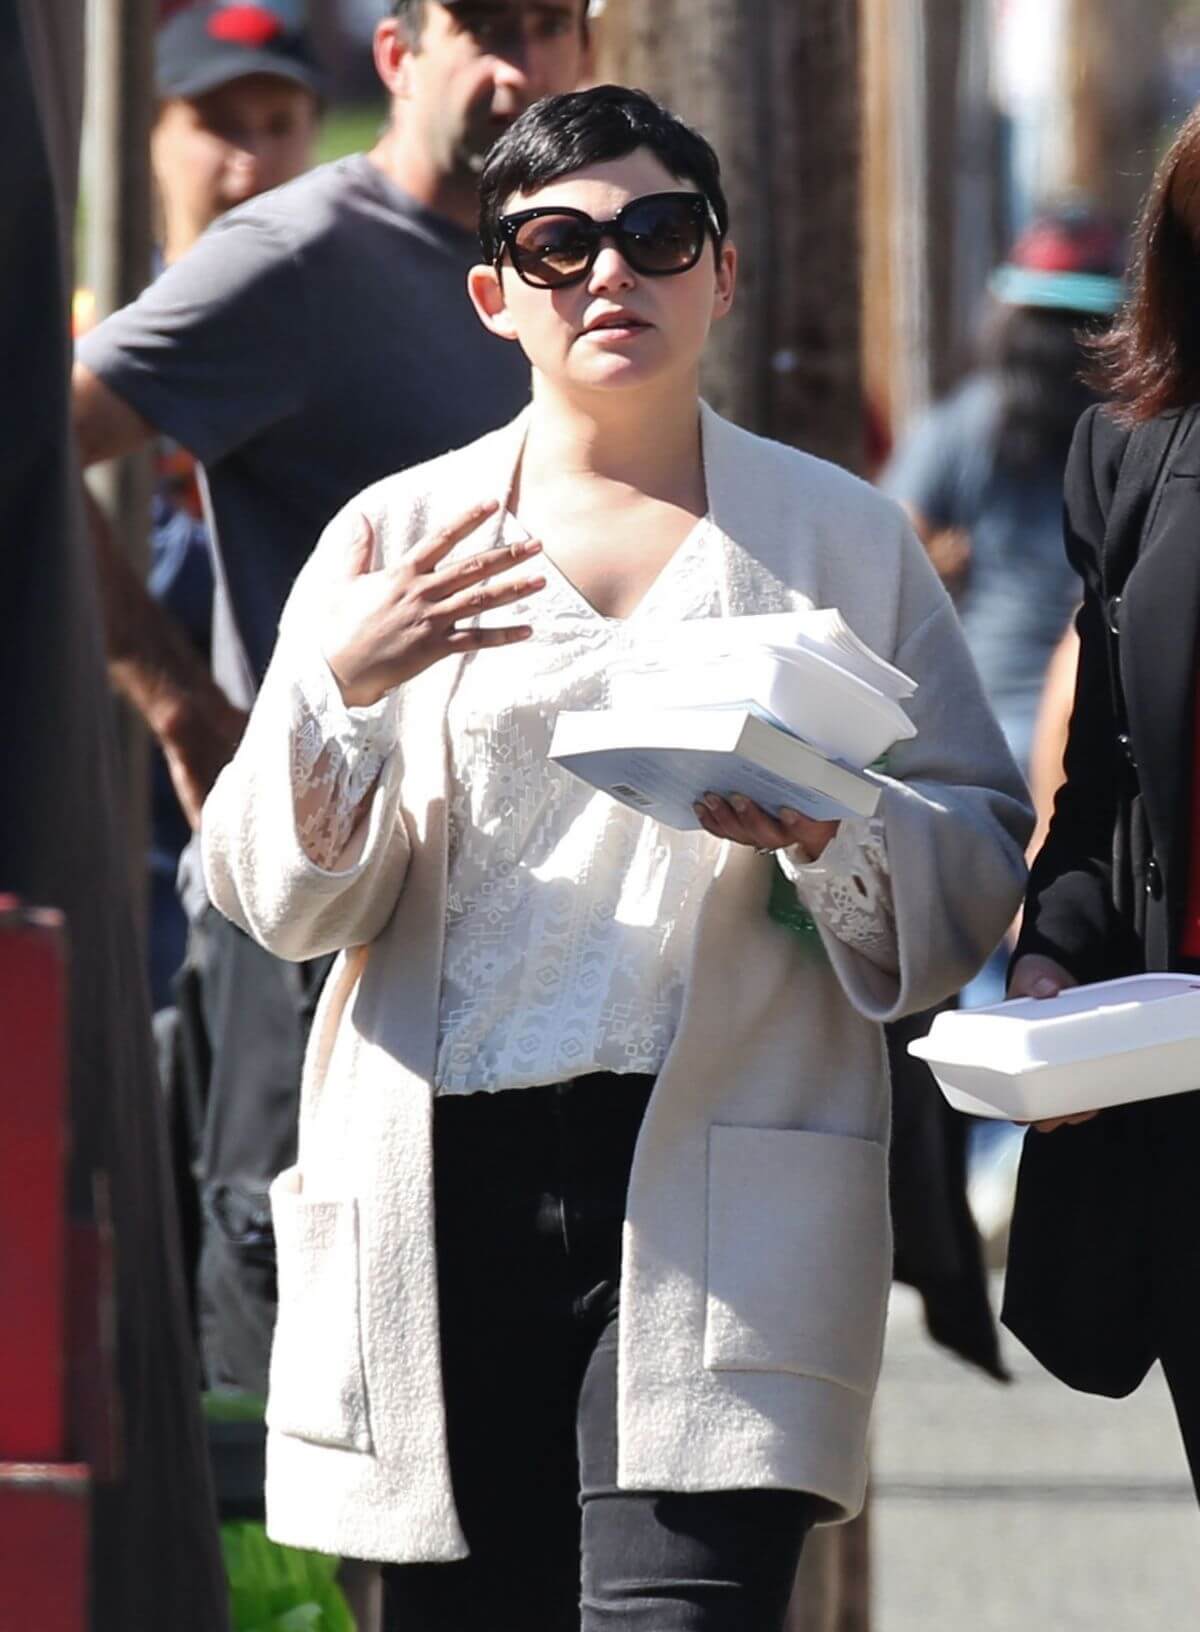 Ginnifer Goodwin Stills on the Set of Once Upon a Time in Vancouver